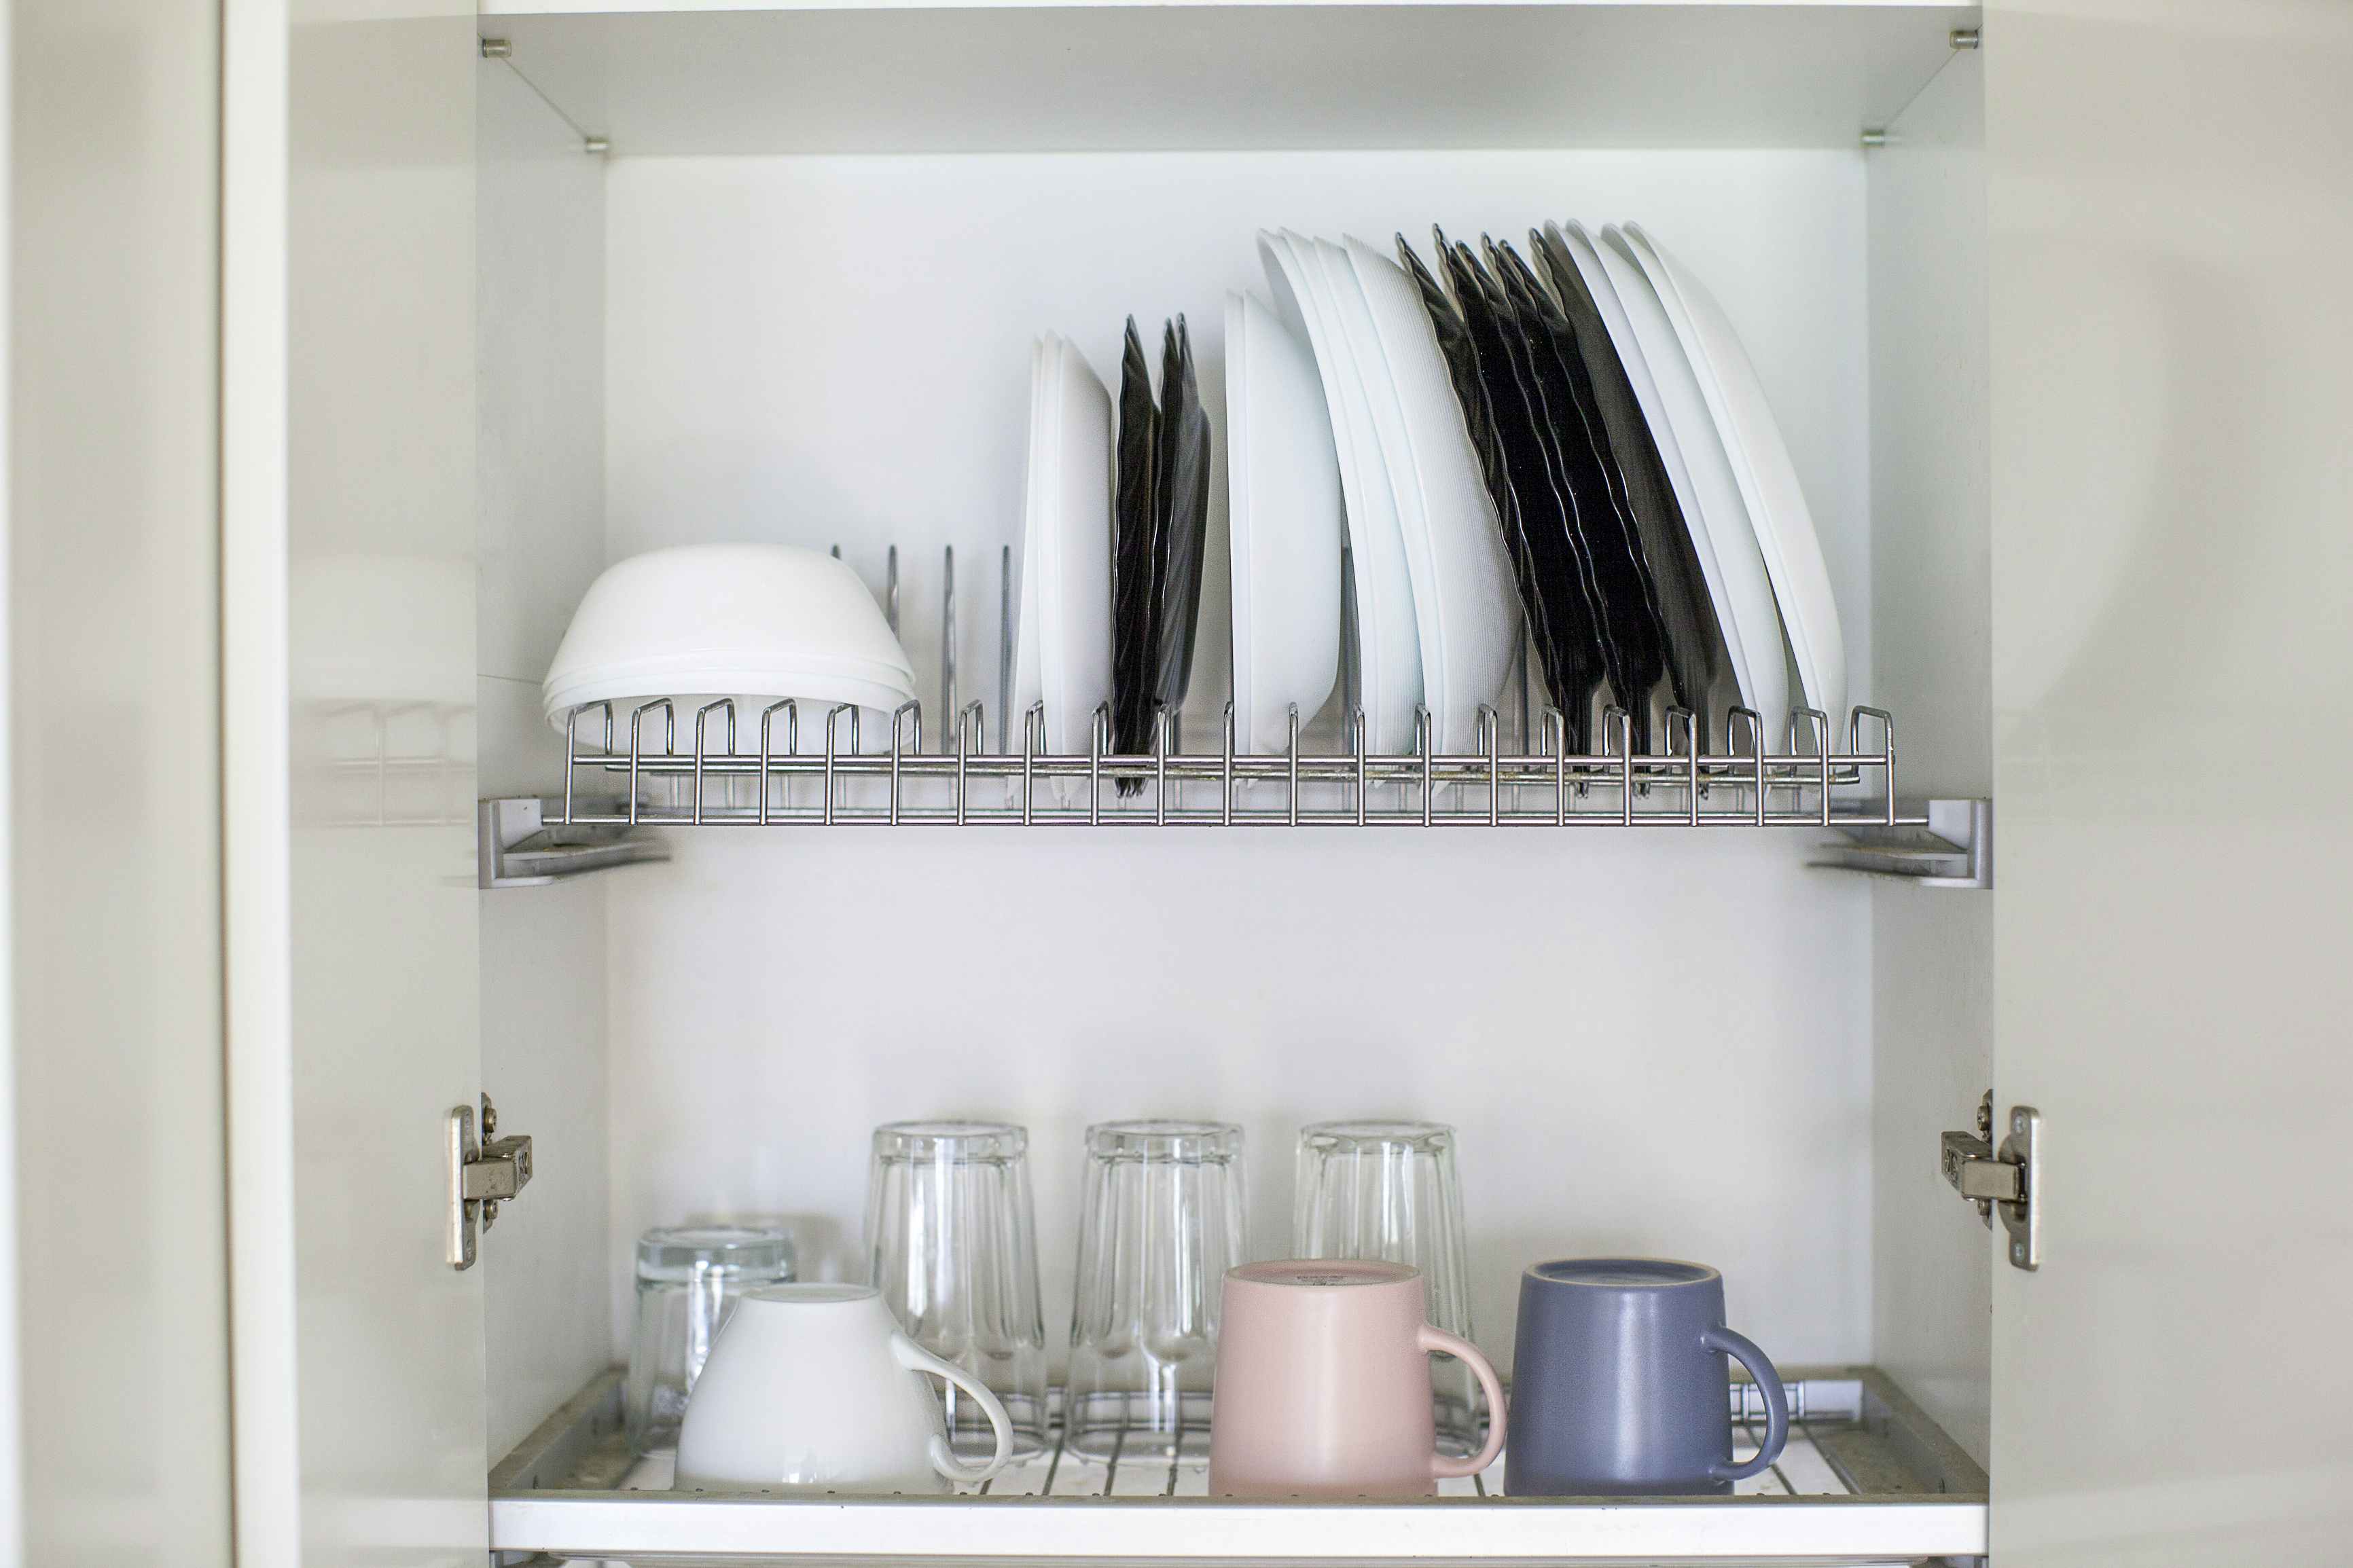 A dish drying rack inside a kitchen cabinet